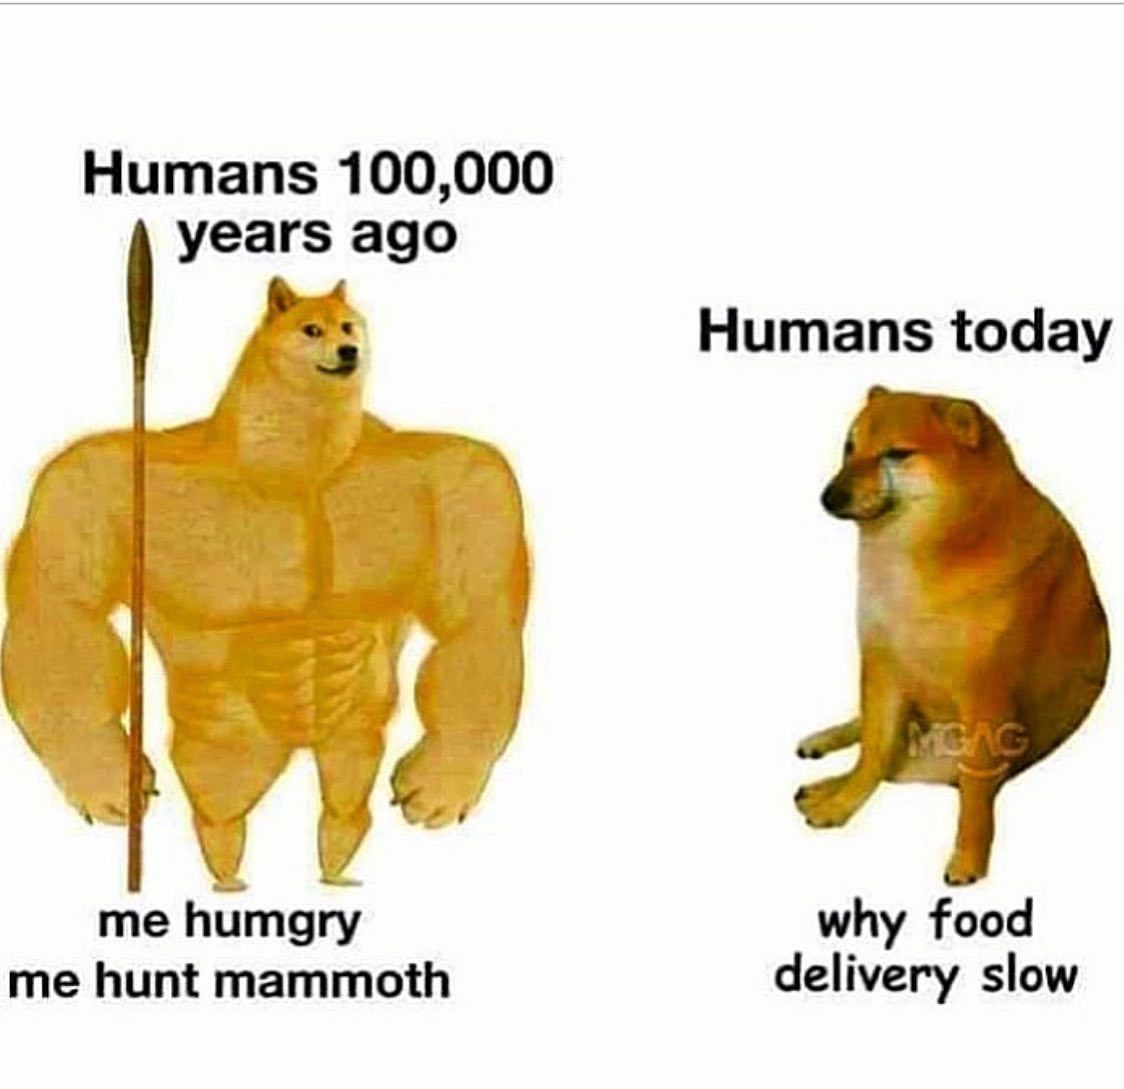 Humans 100,000 years ago: Me humgry me hunt mammoth. Humans today: Why food delivery slow.